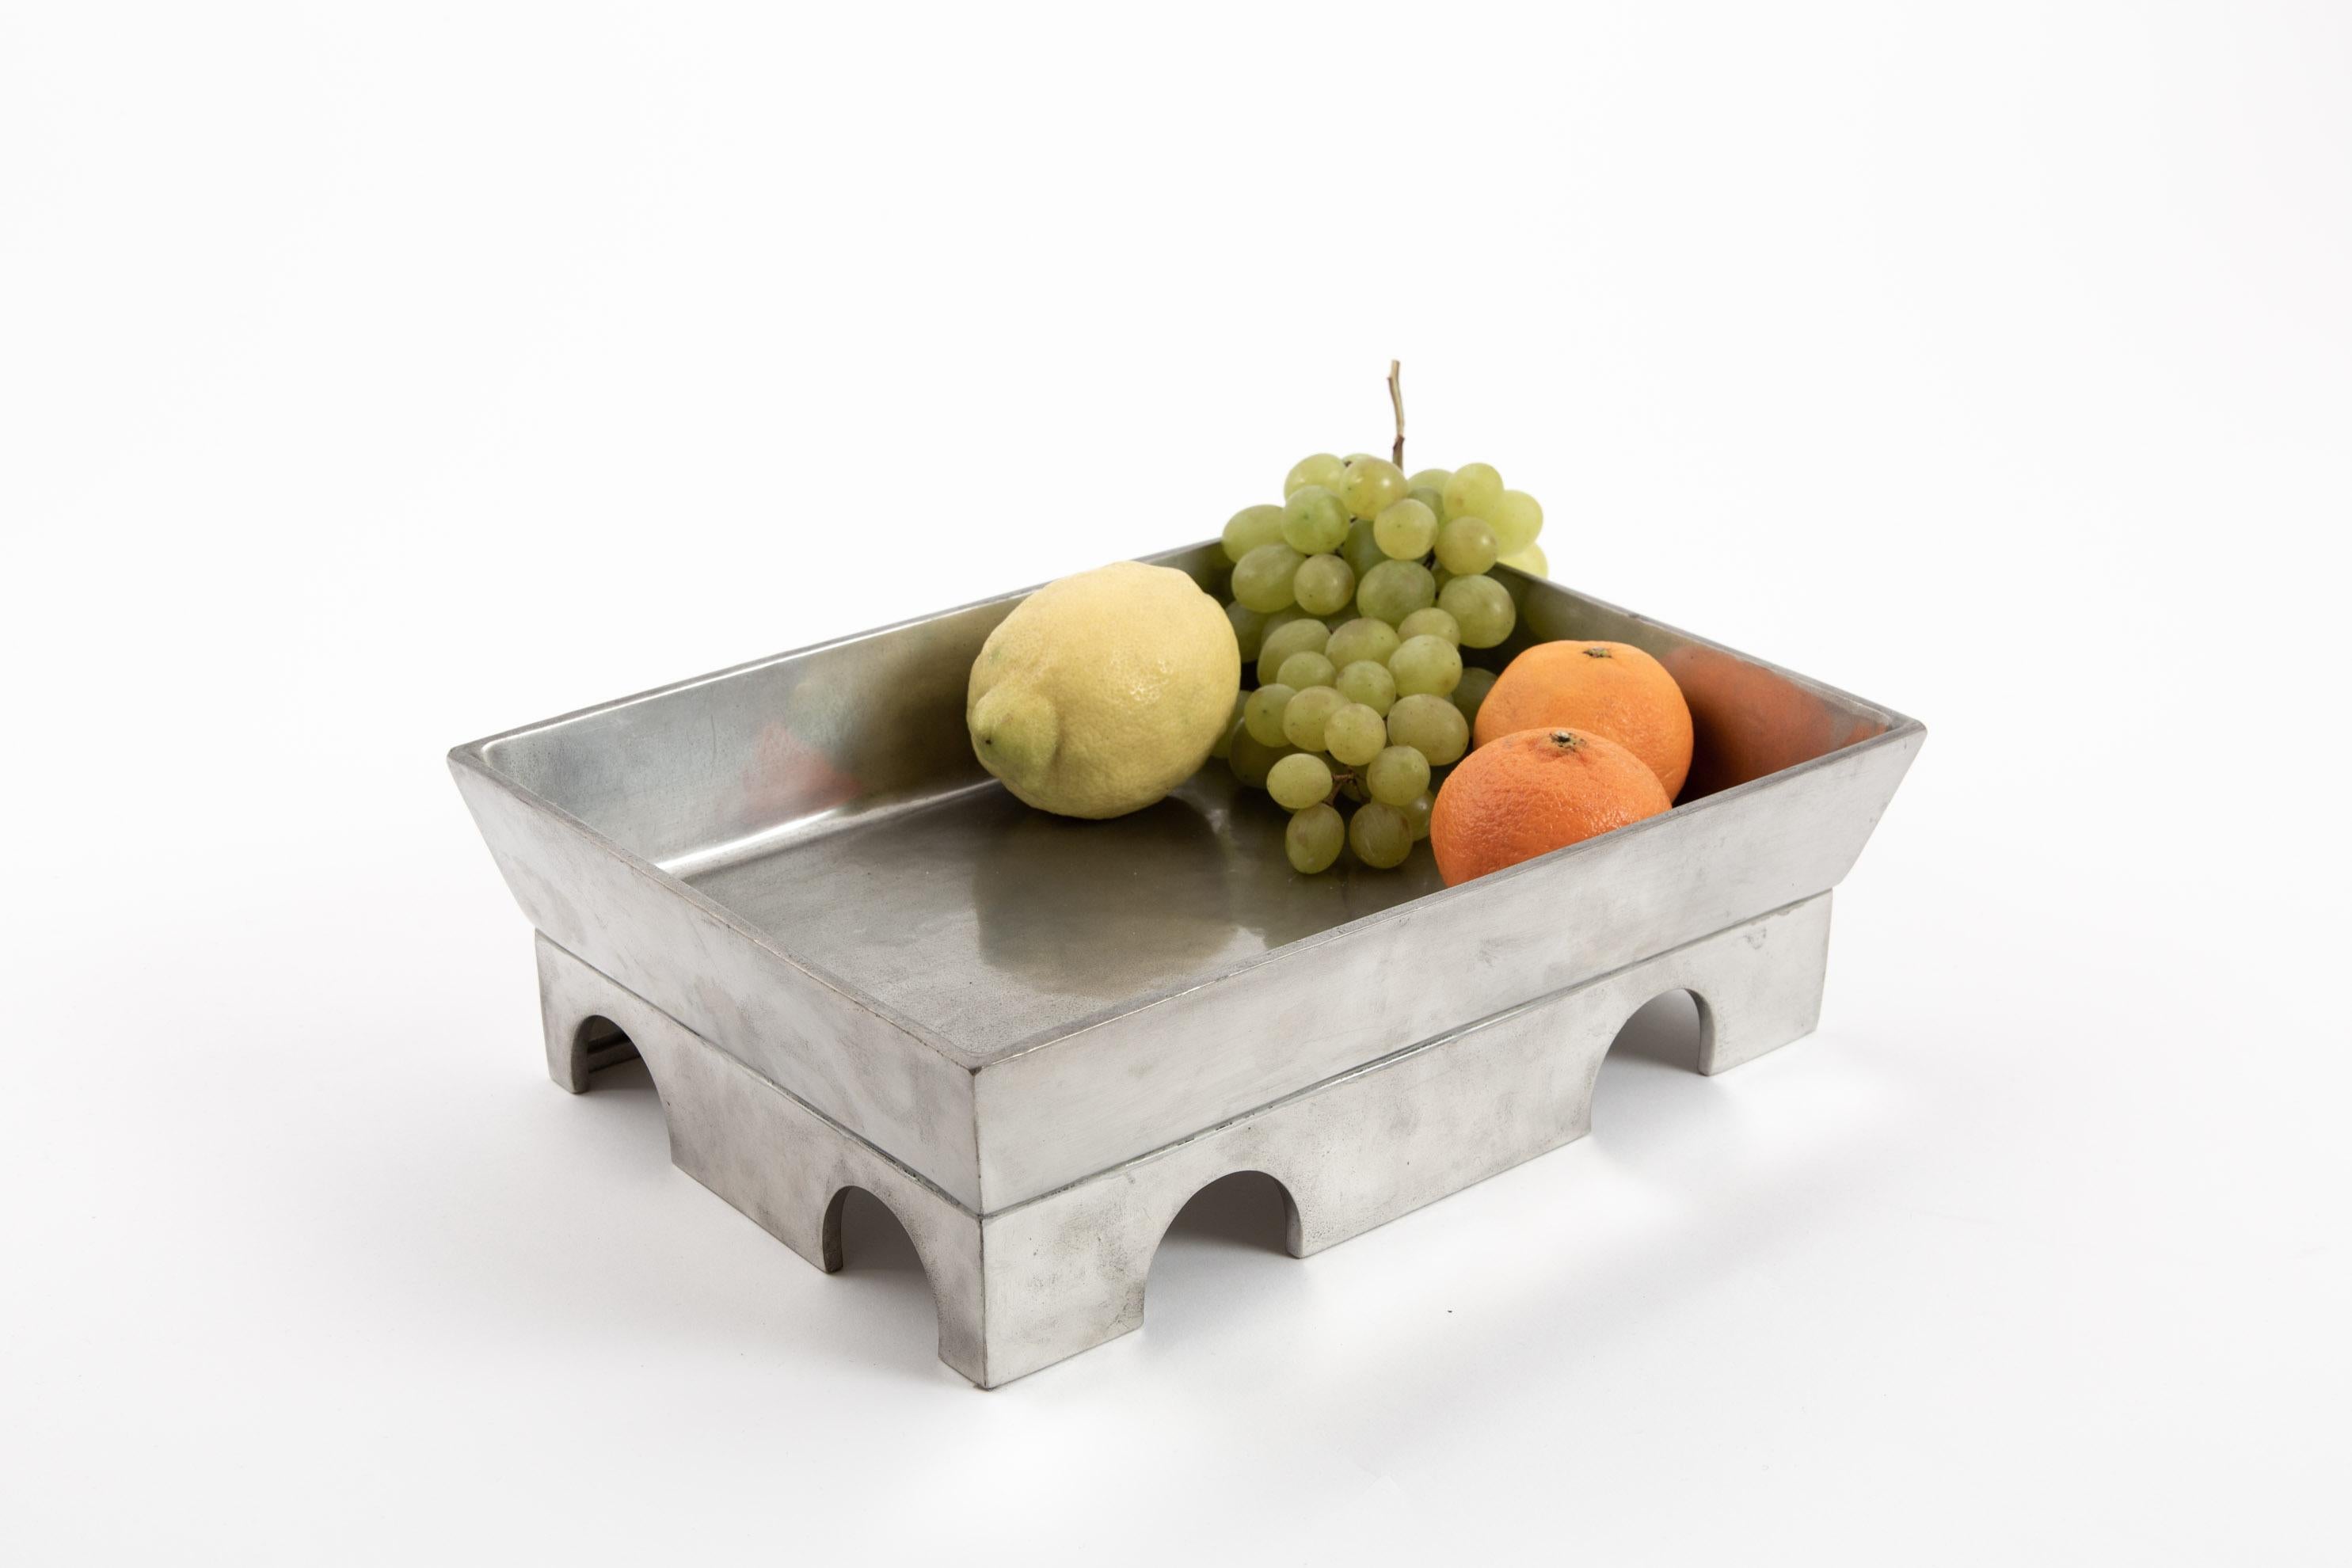 Ettore Sottsass pewter bowl Teodora for Serafino Zani. Produced by Metallia in 1999. Ettore Sottsass designed a serie of pewter centerpieces for the Serafino Zani company. With this pewter bowl you can feel the heavy power of the material. The form